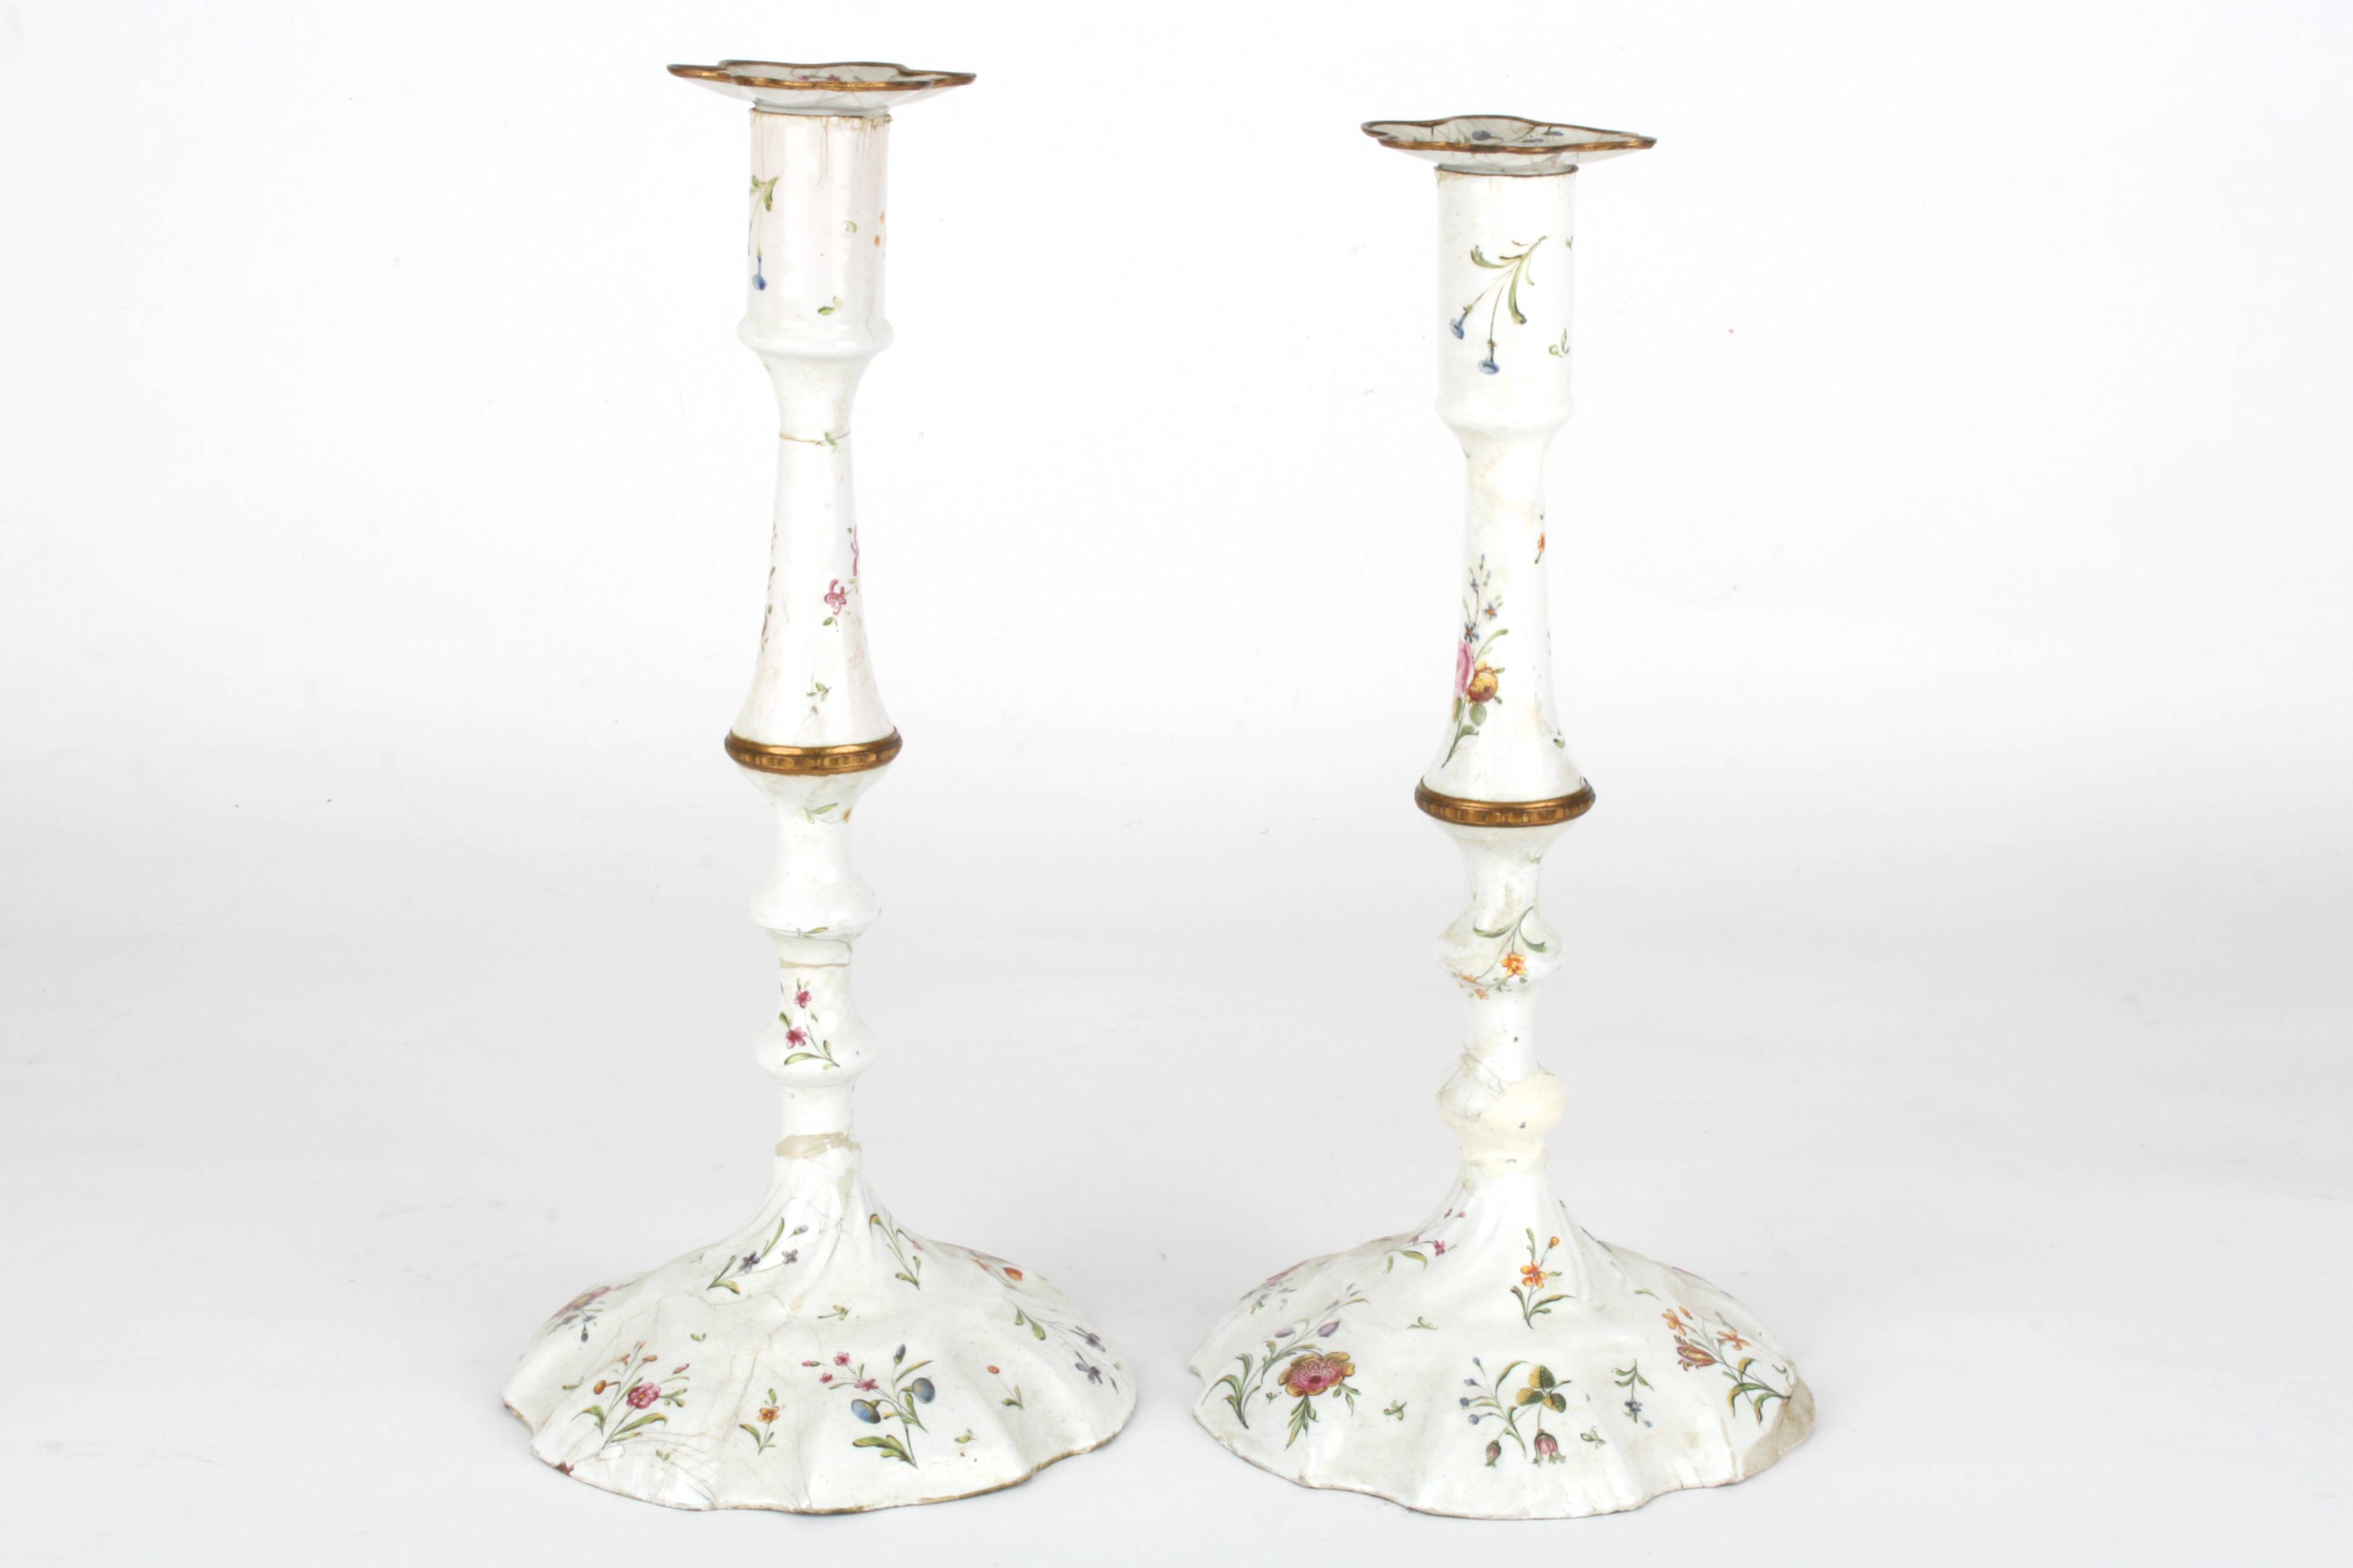 A large pair of 18th Century English enamelled metal candlesticks
decorated with vignettes and